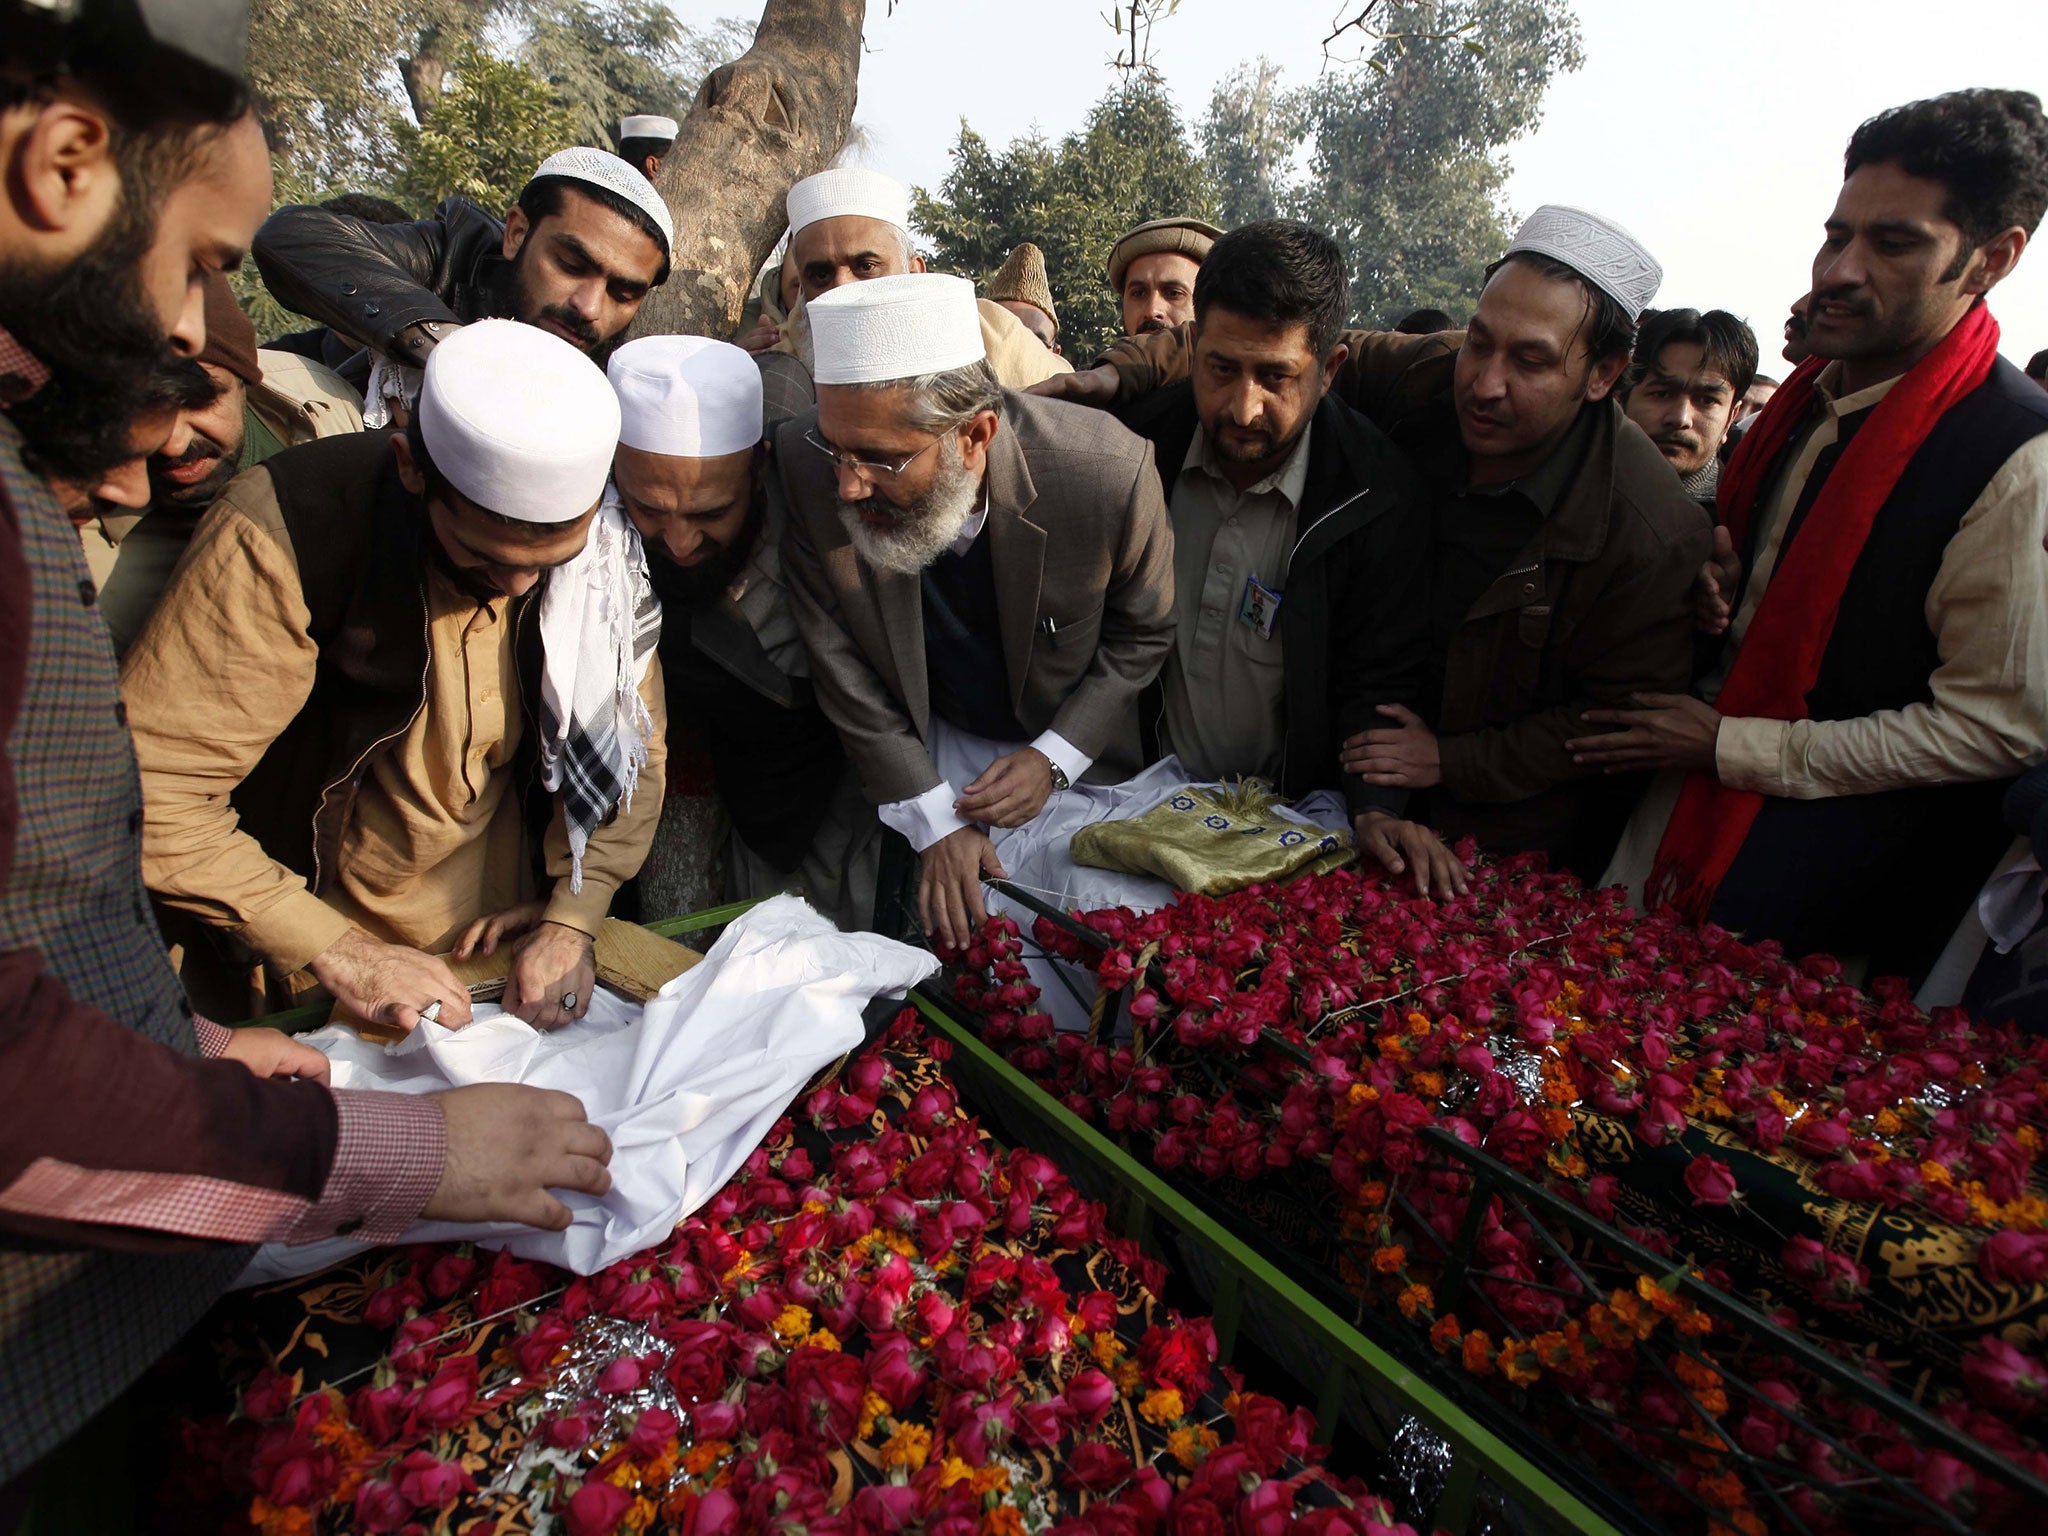 People attending the funeral of students killed in the Taliban attack on a school prepare for their burial in Peshawar, Pakistan, on Wednesday, December 17